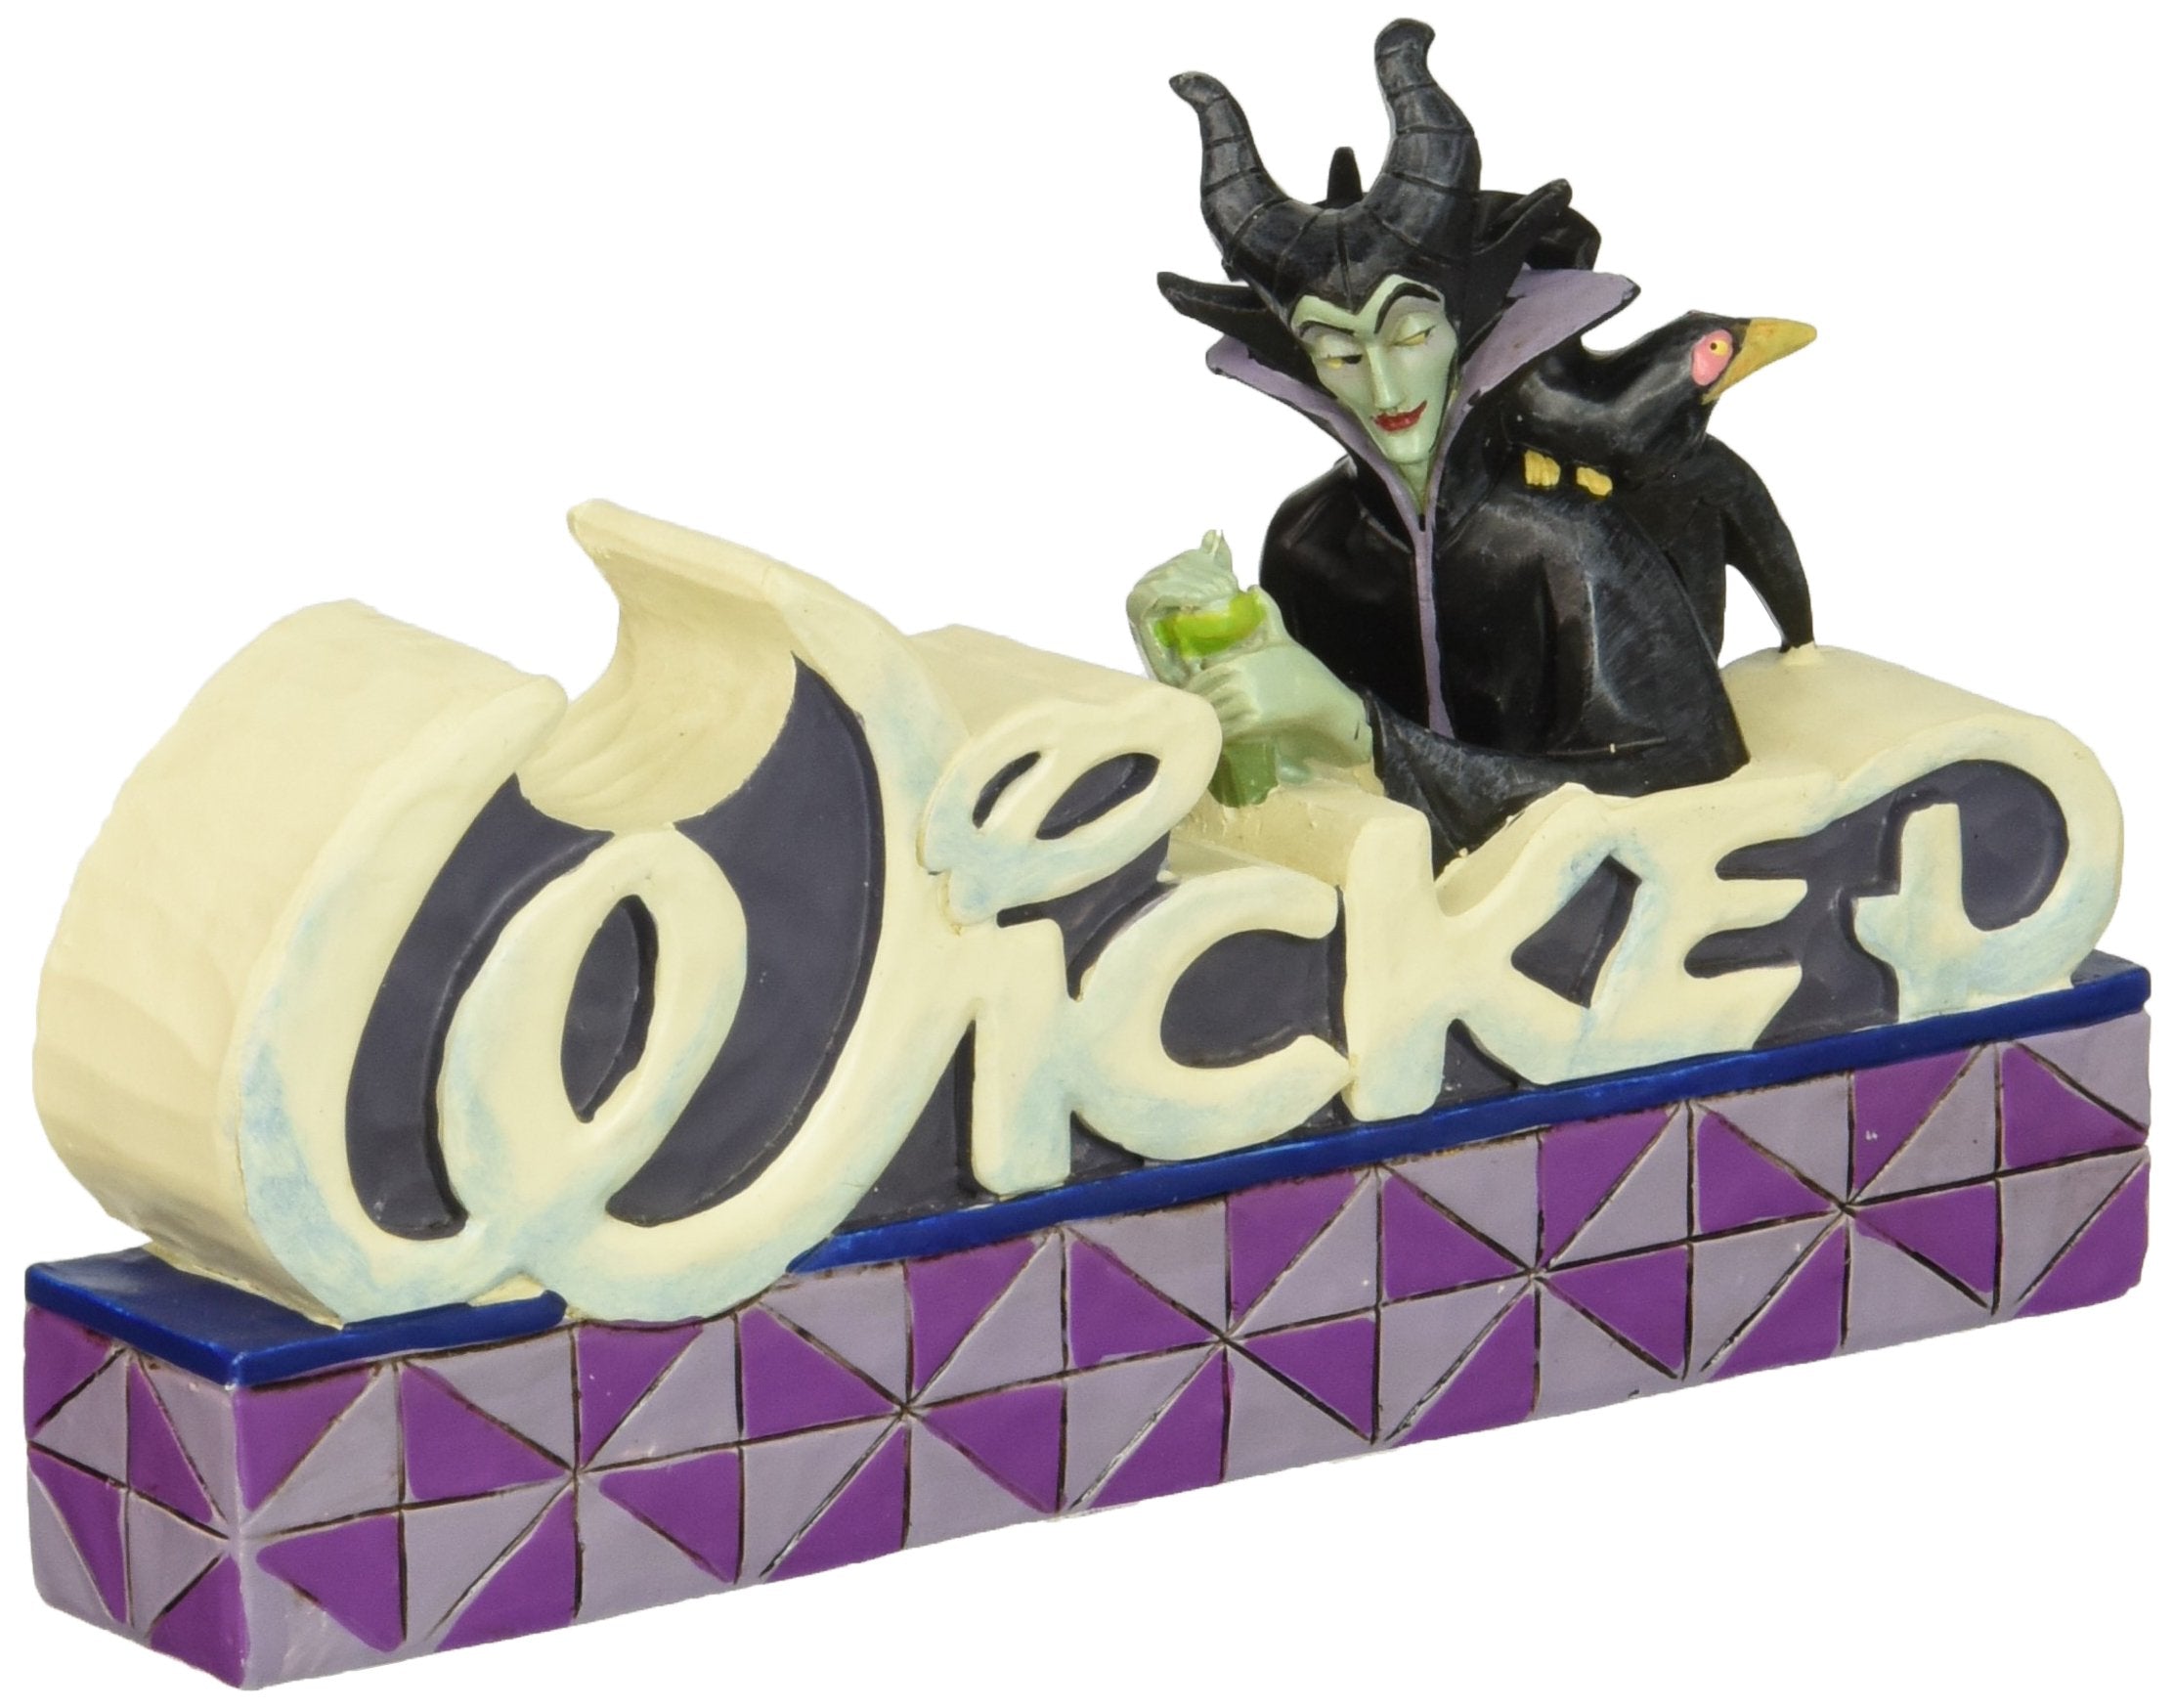 Enesco Disney Traditions by Jim Shore Maleficent Wicked Figurine, 3.5 in